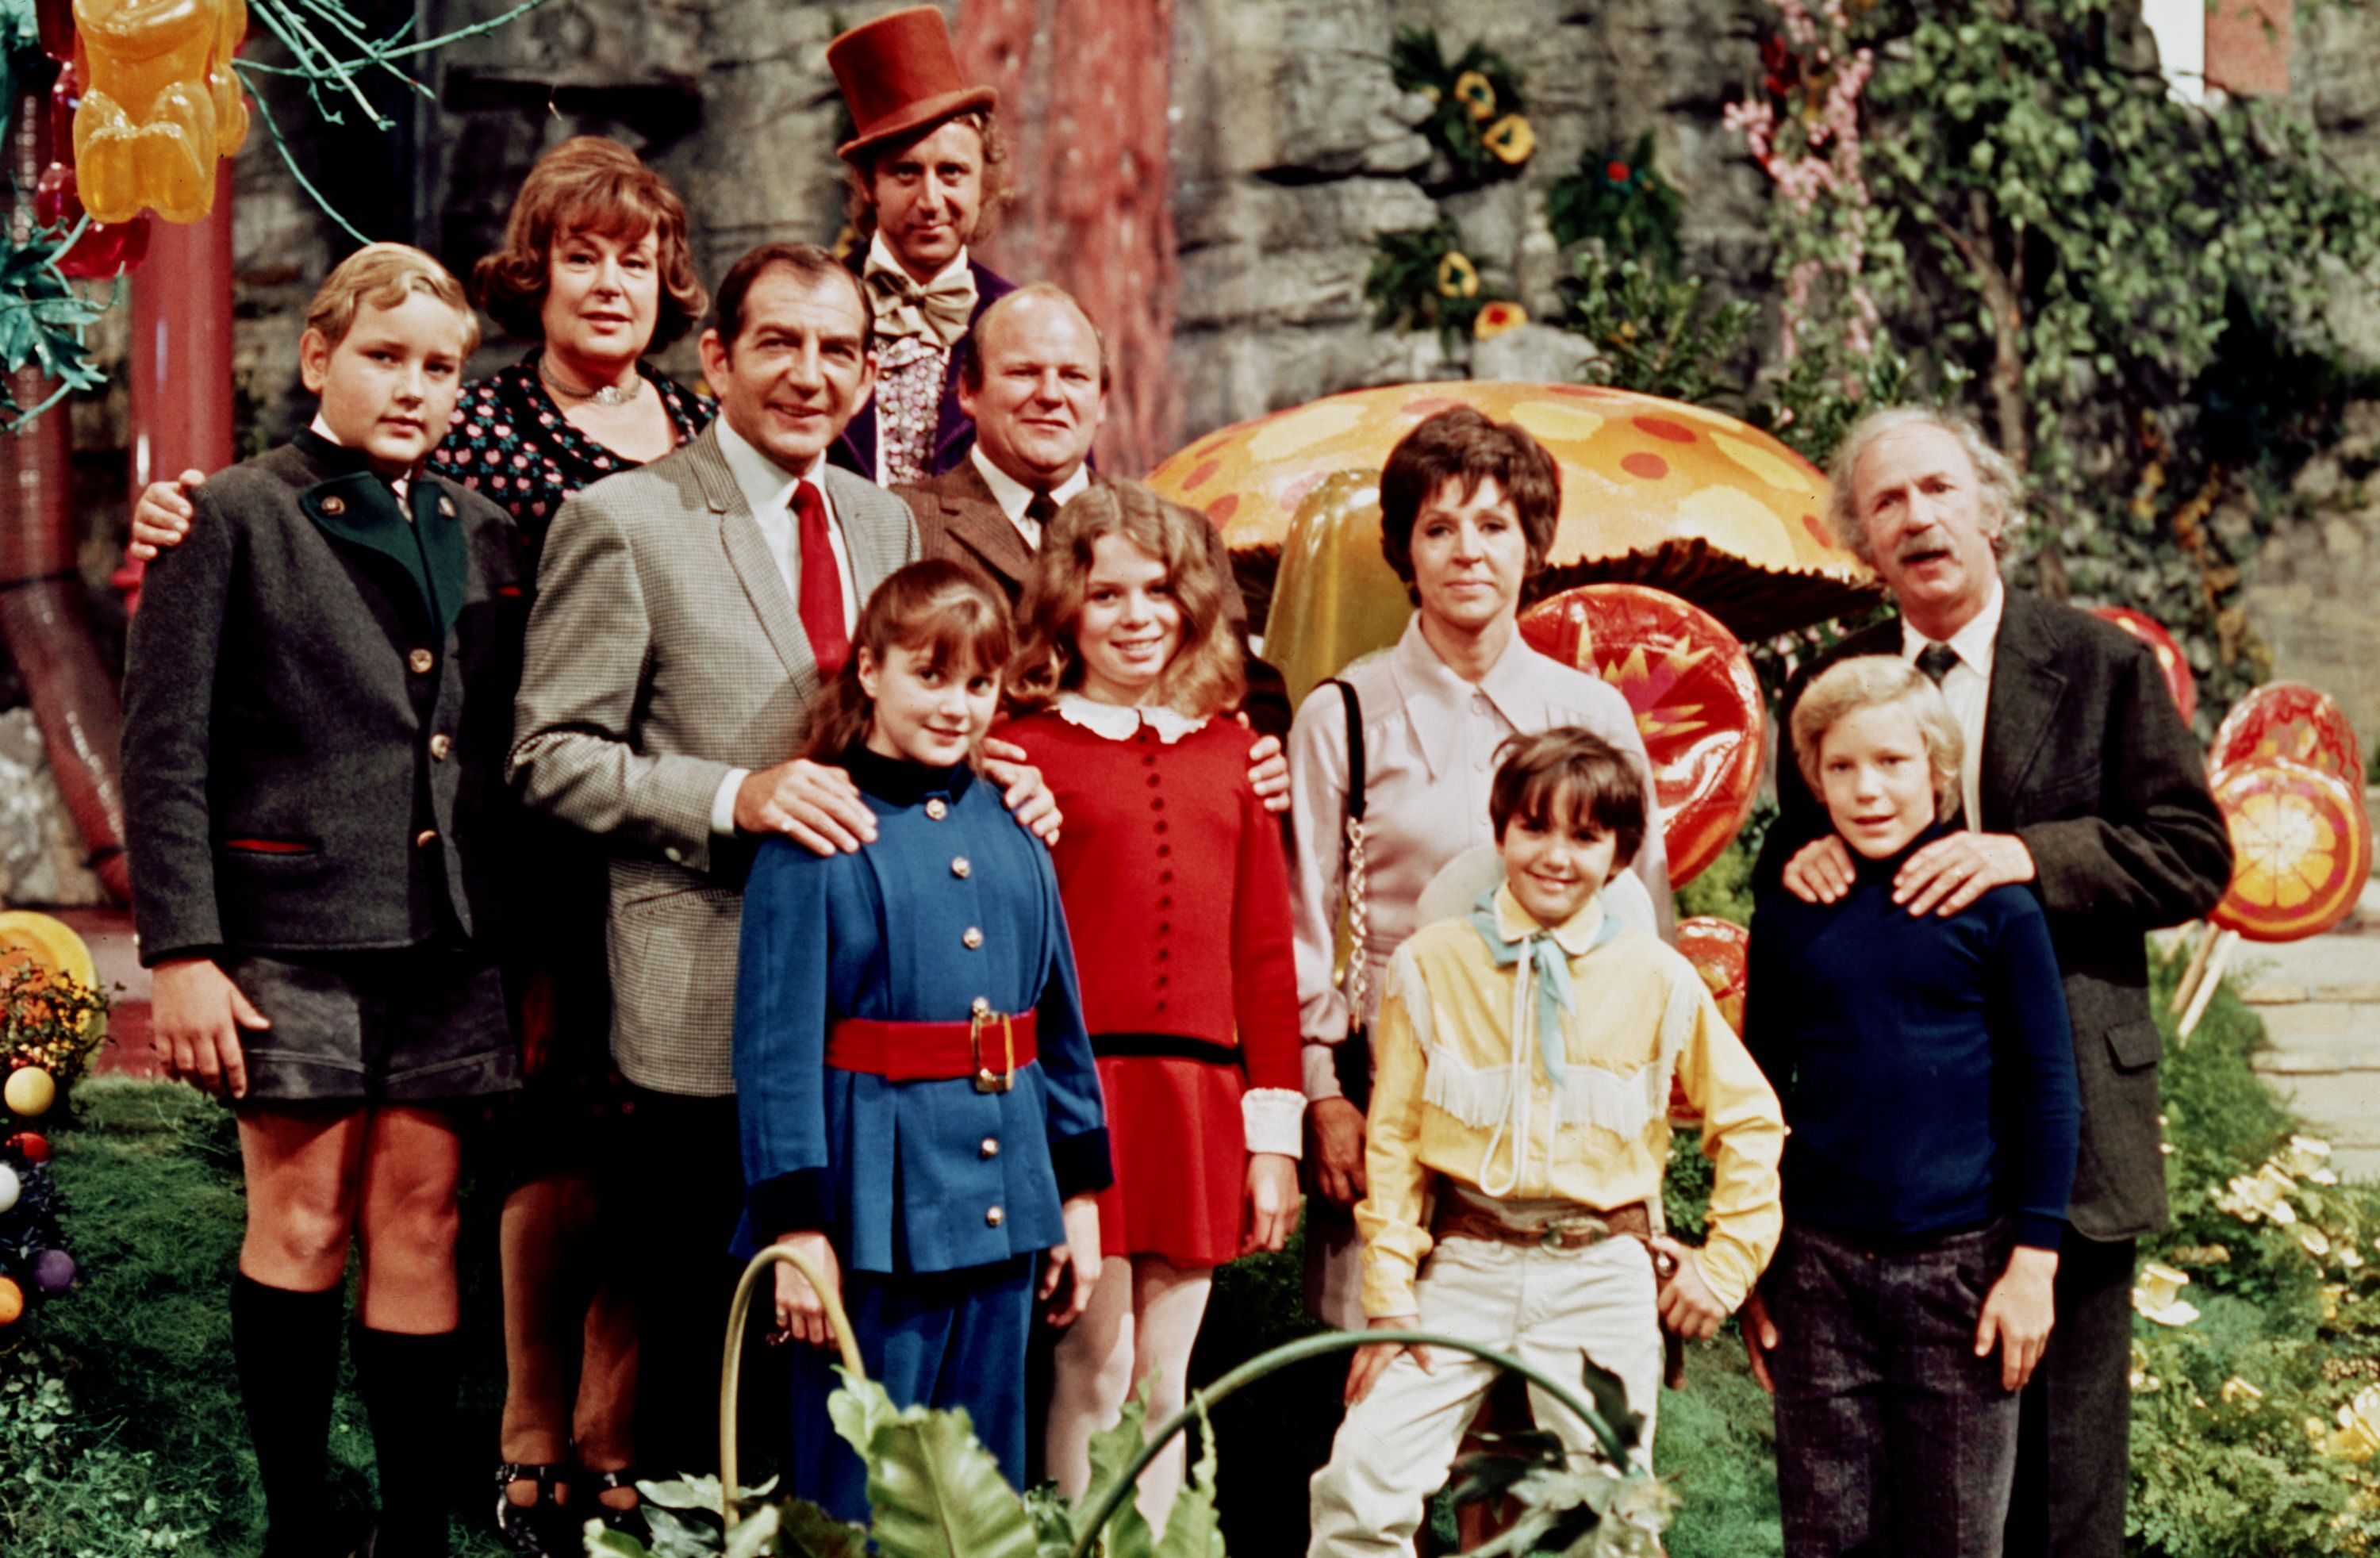 willy-wonka-and-the-chocolate-factory-cast-02